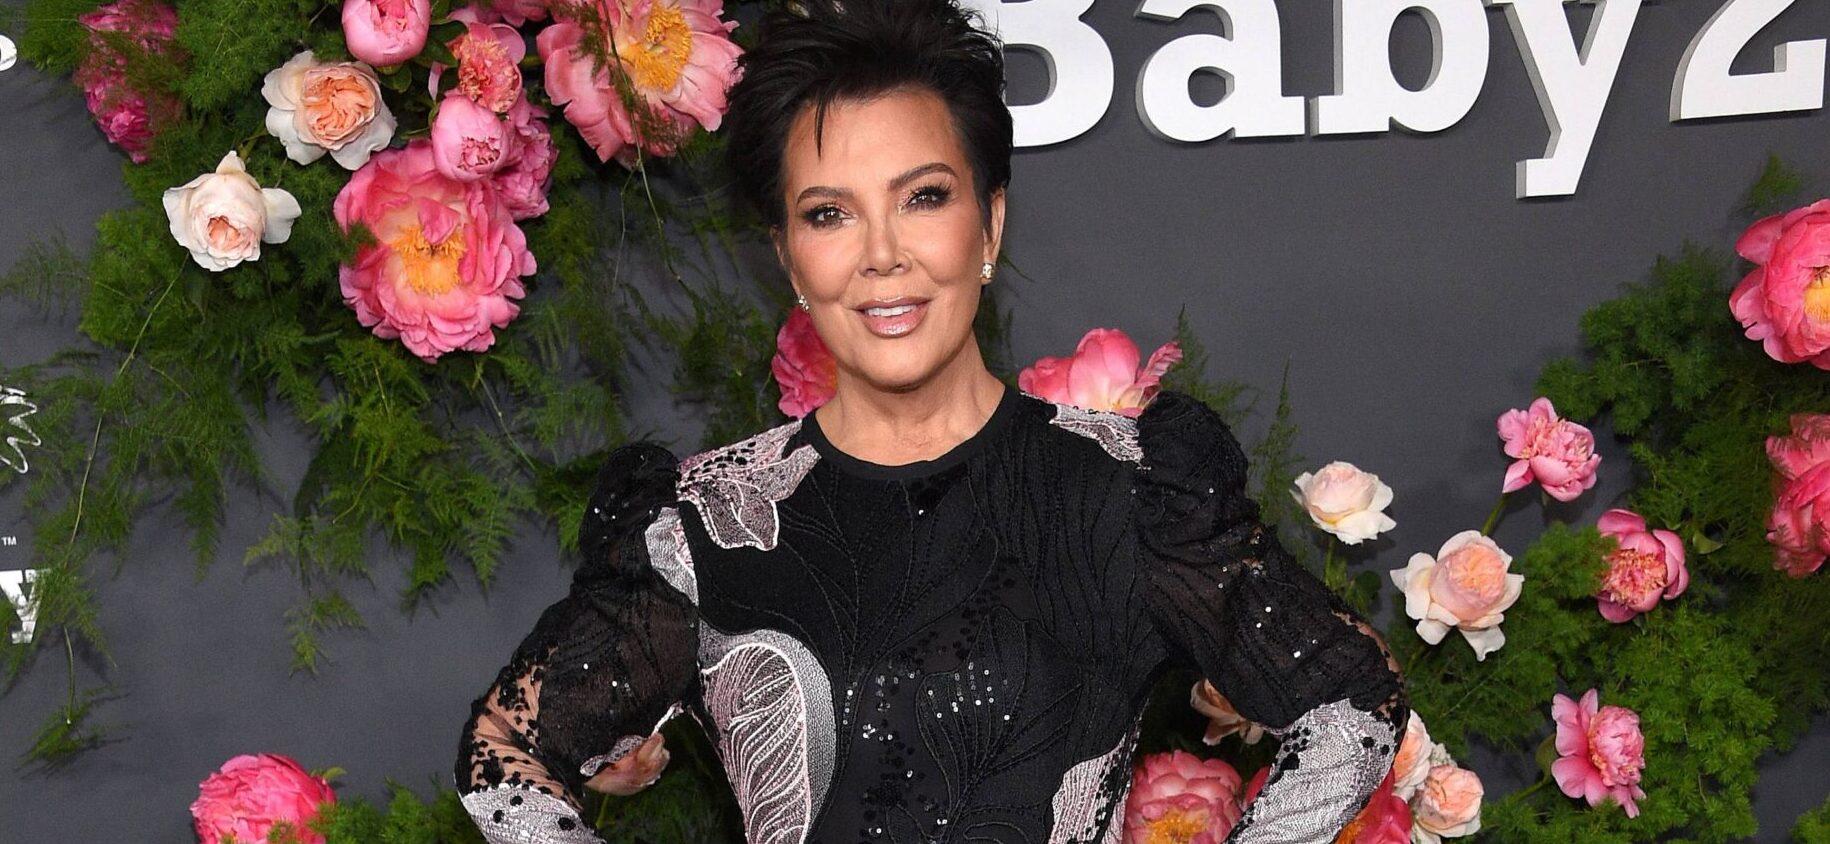 Kris Jenner Lawsuit Over Allegedly Sexually Assaulting An Ex-Bodyguard Is Dismissed